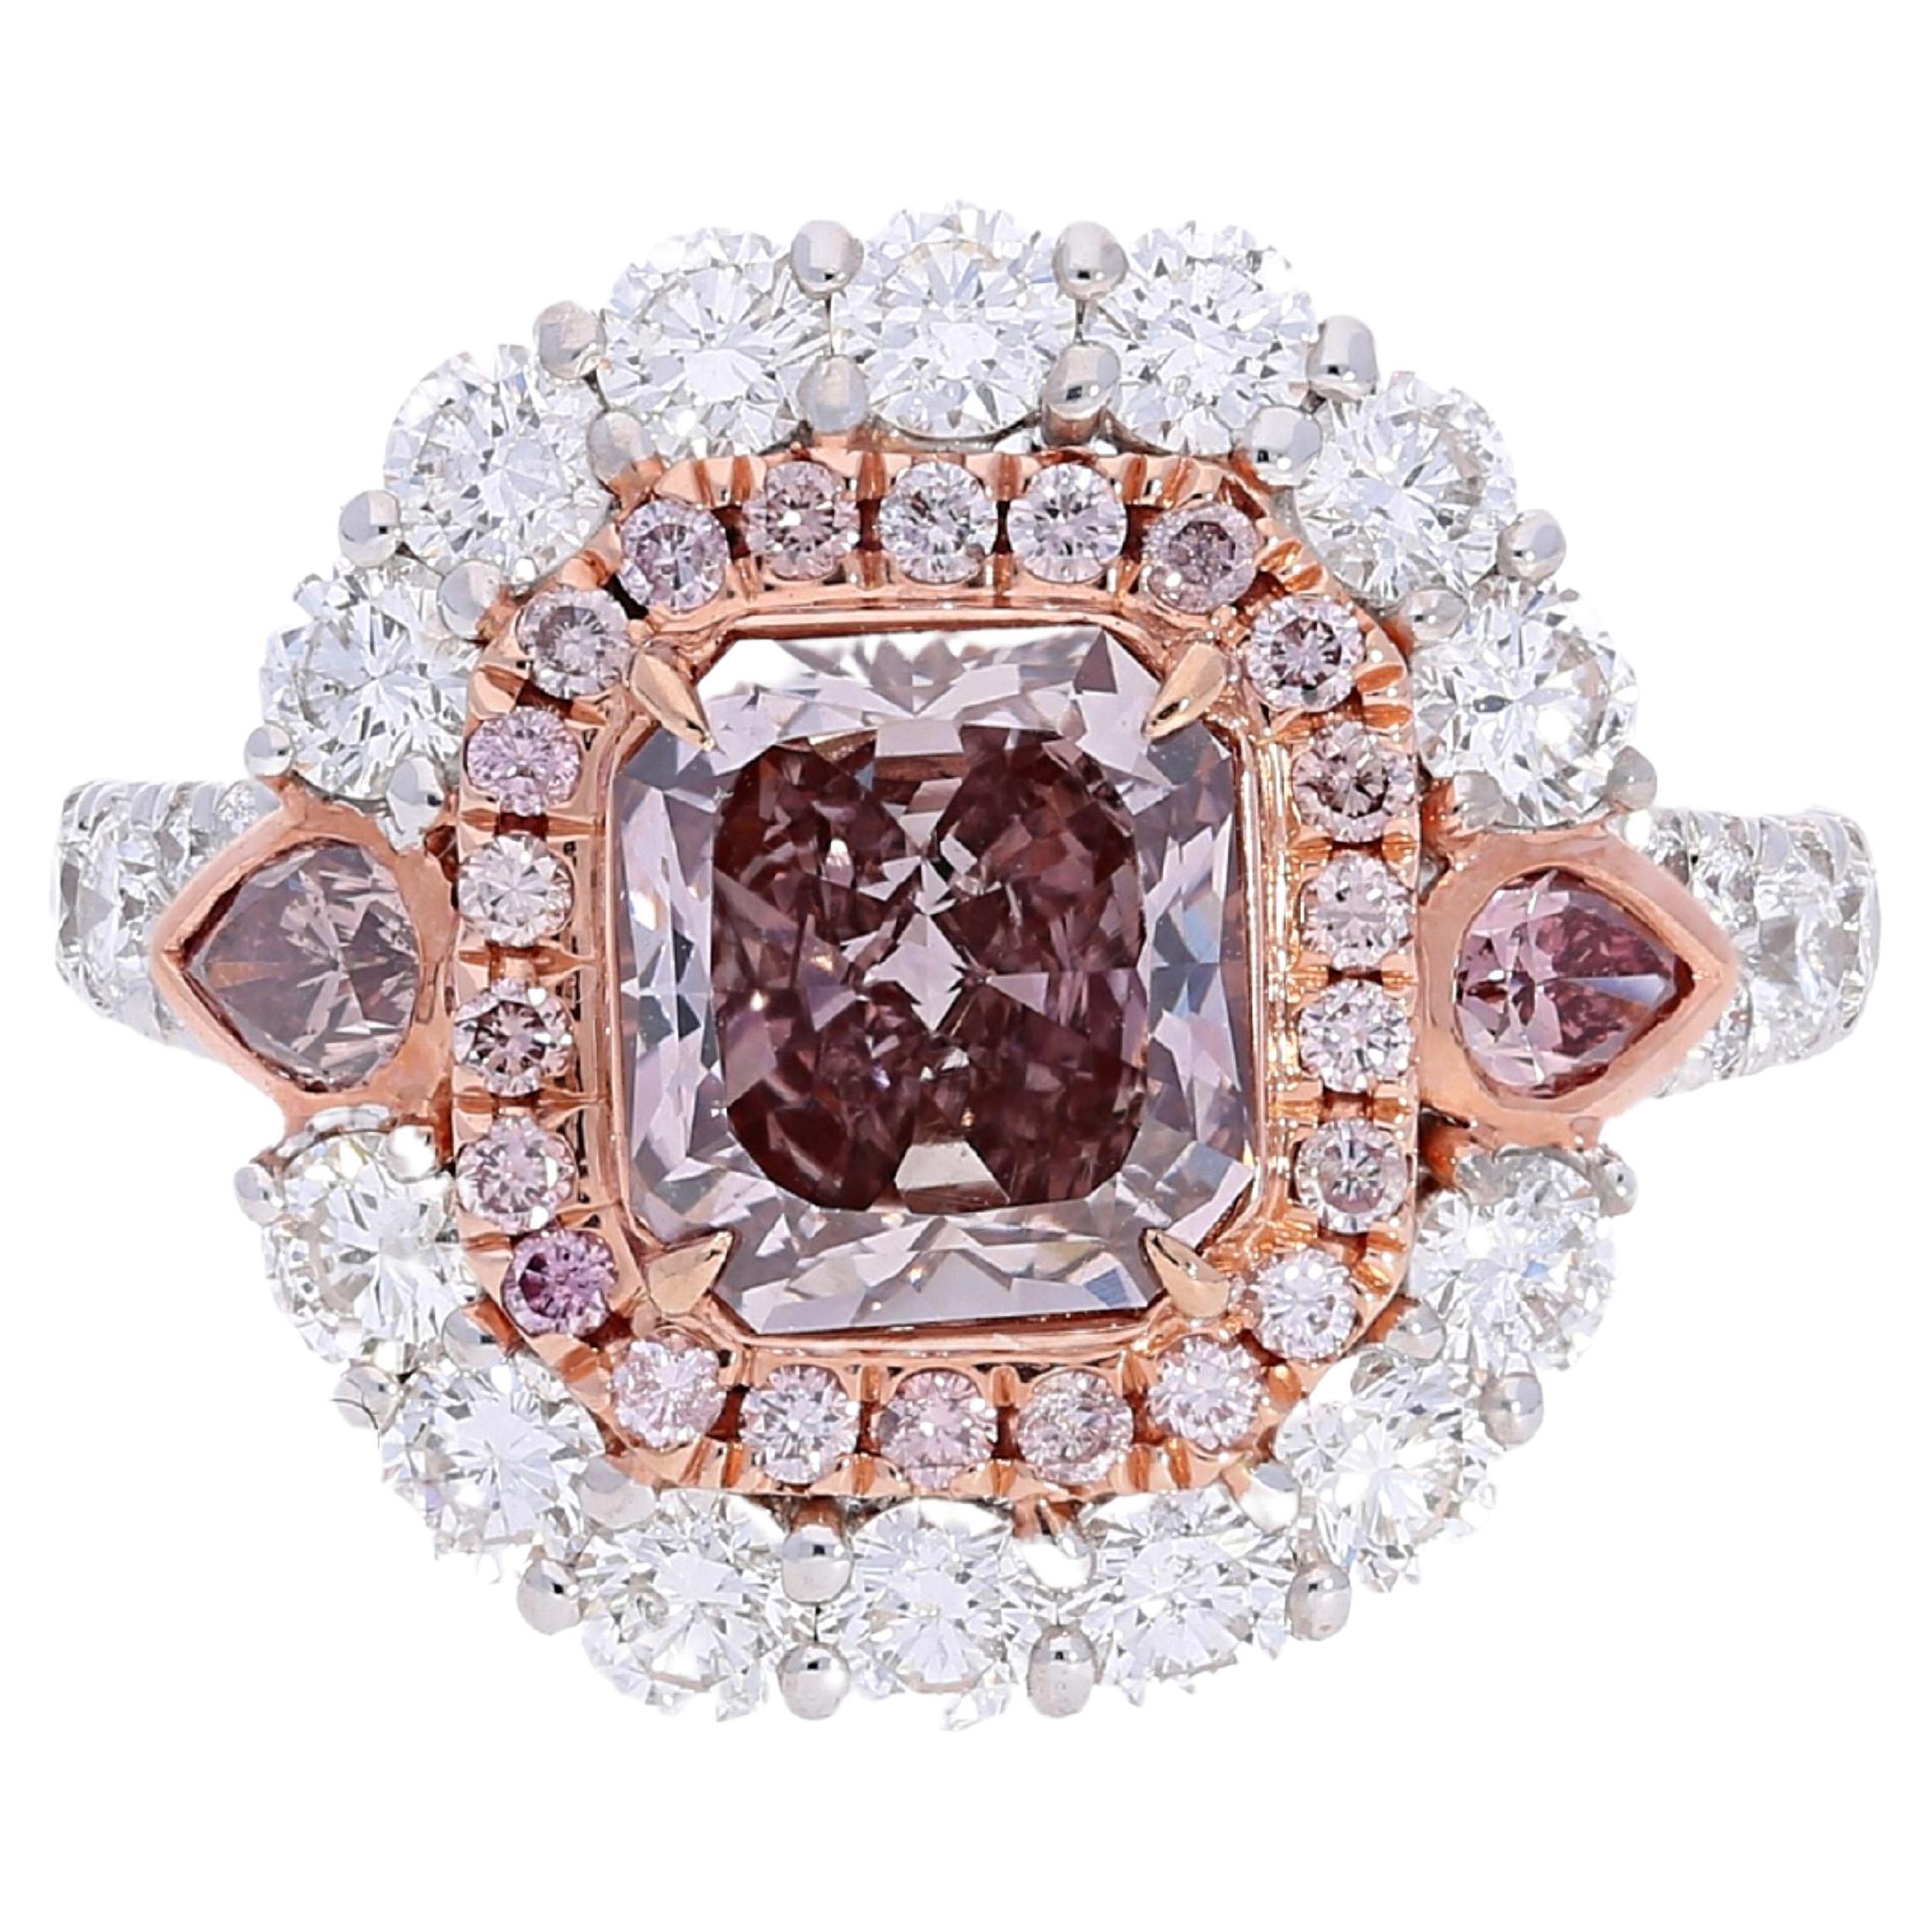 GIA Certified Fancy Dark Brown Pink Diamond Ring with Diamond Halo in 18k For Sale